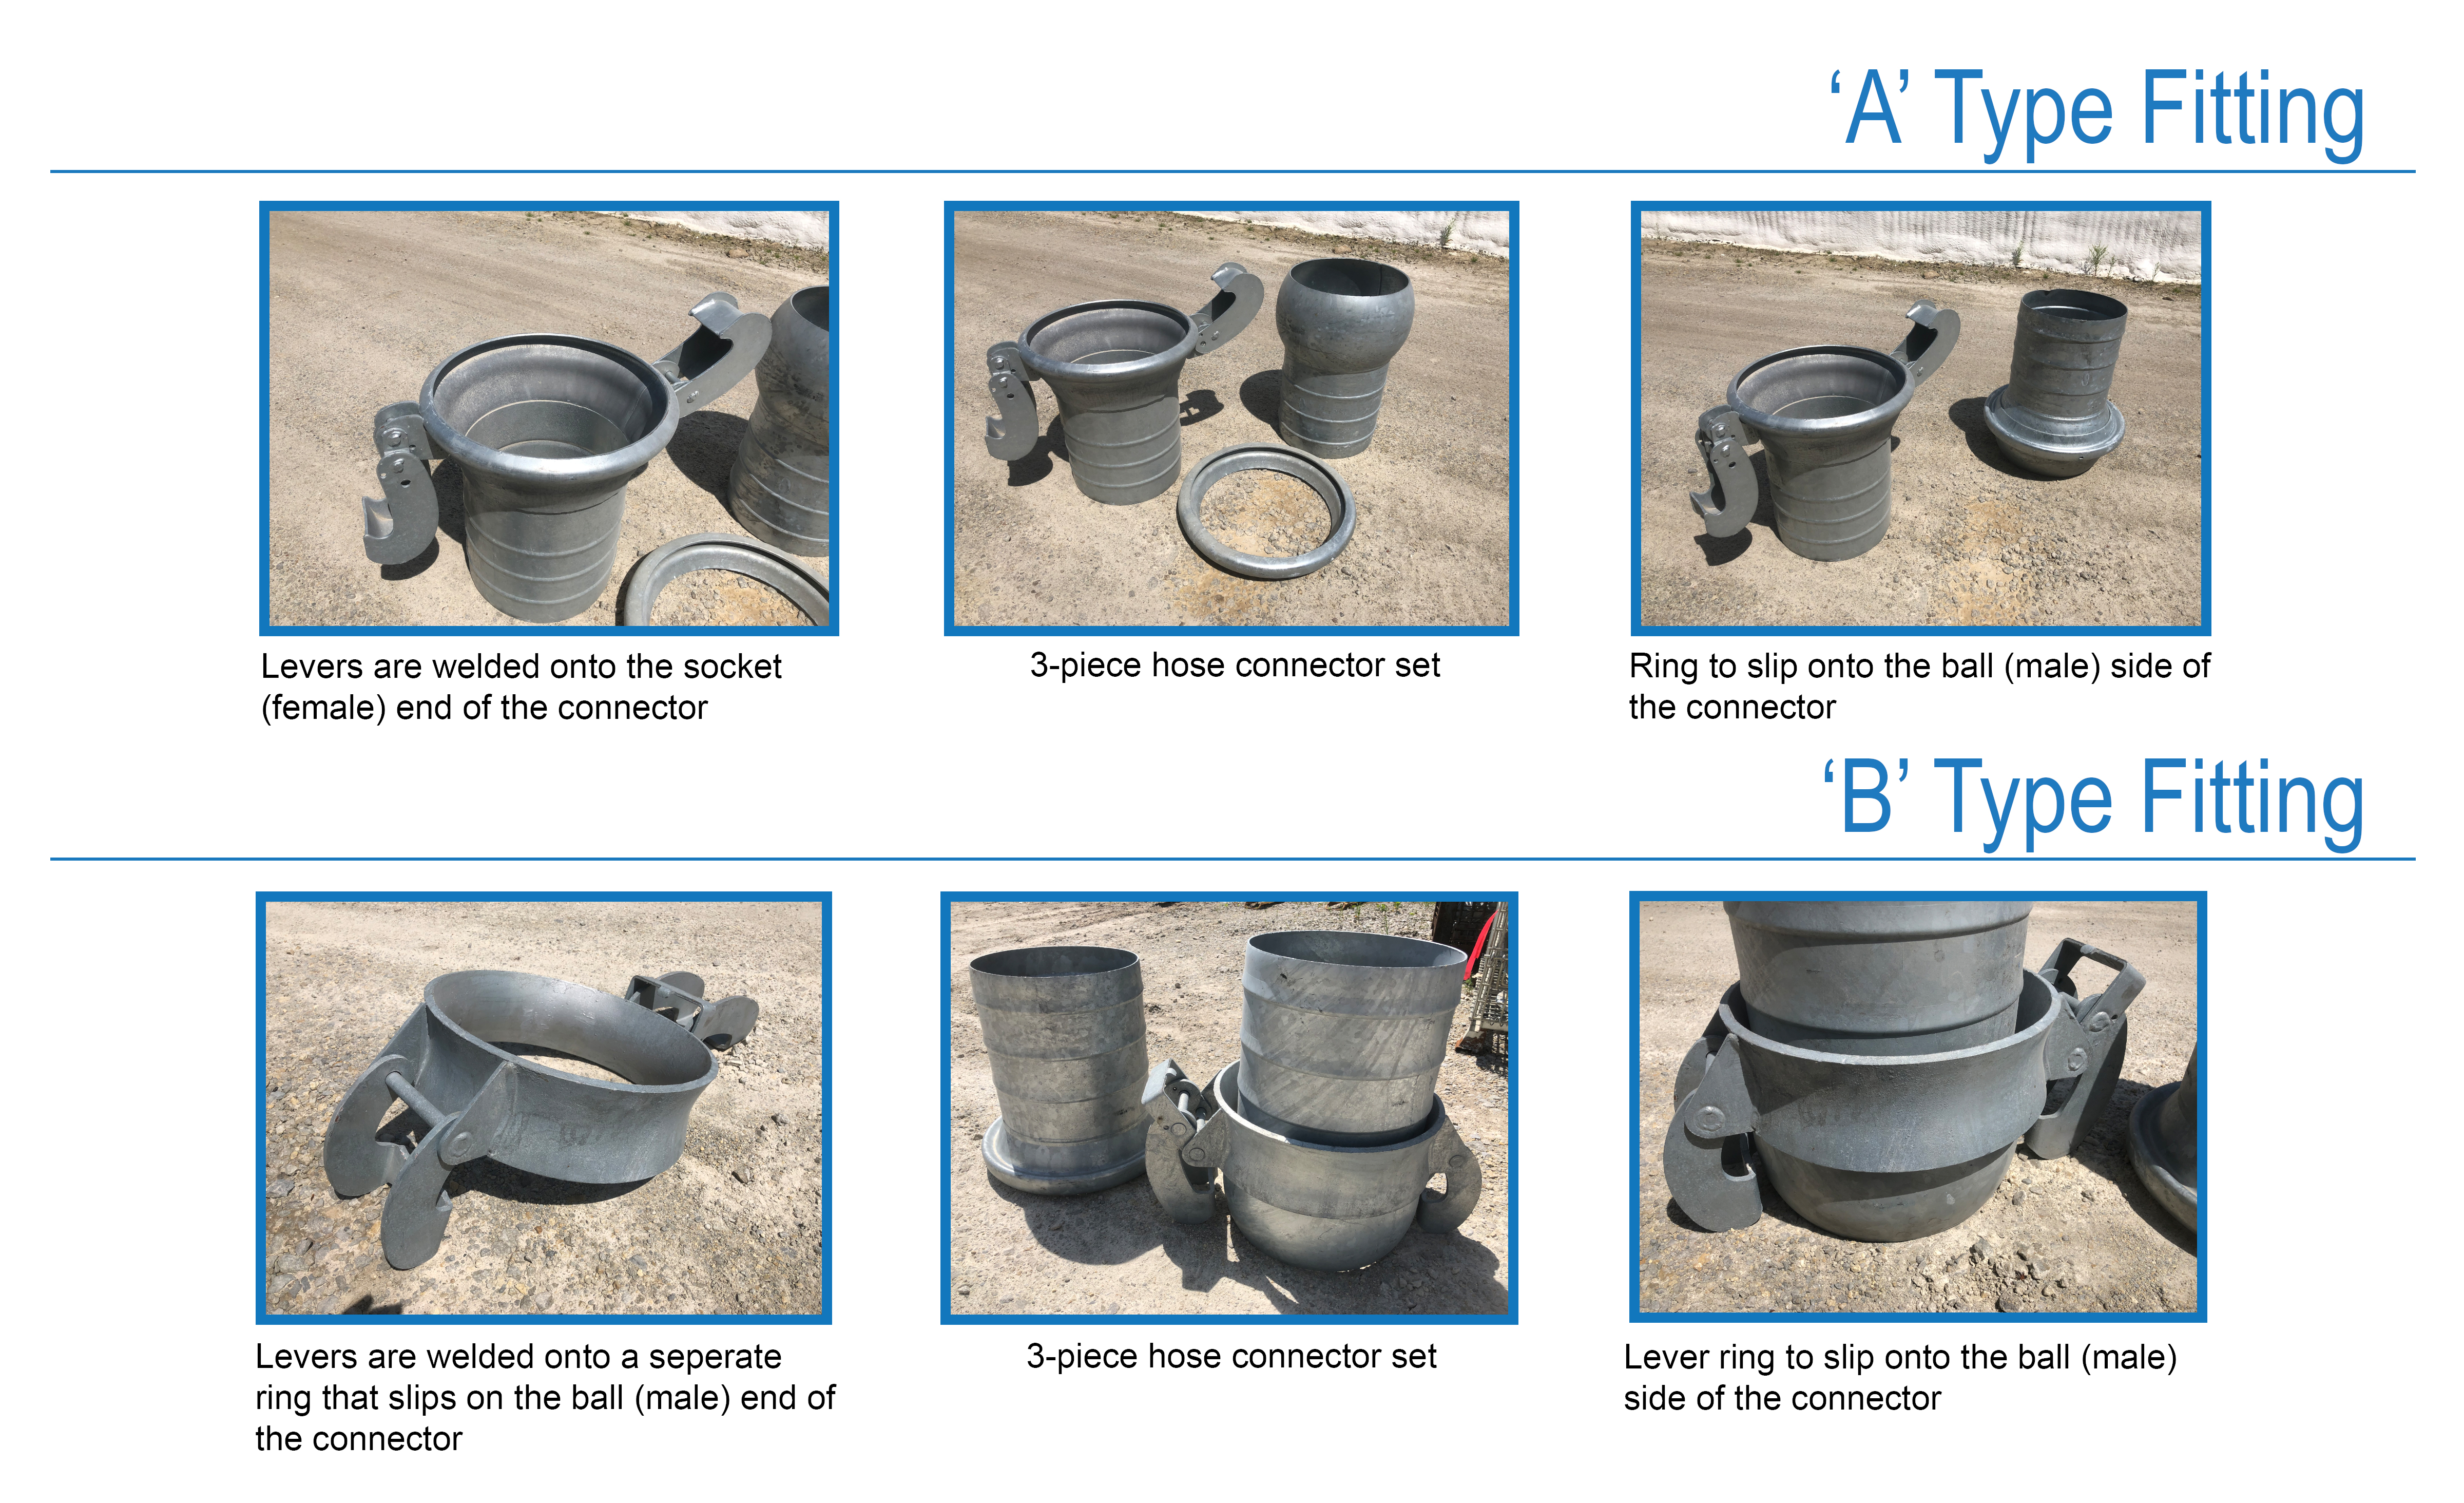 Difference between Type A and Type B Pipe Fittings